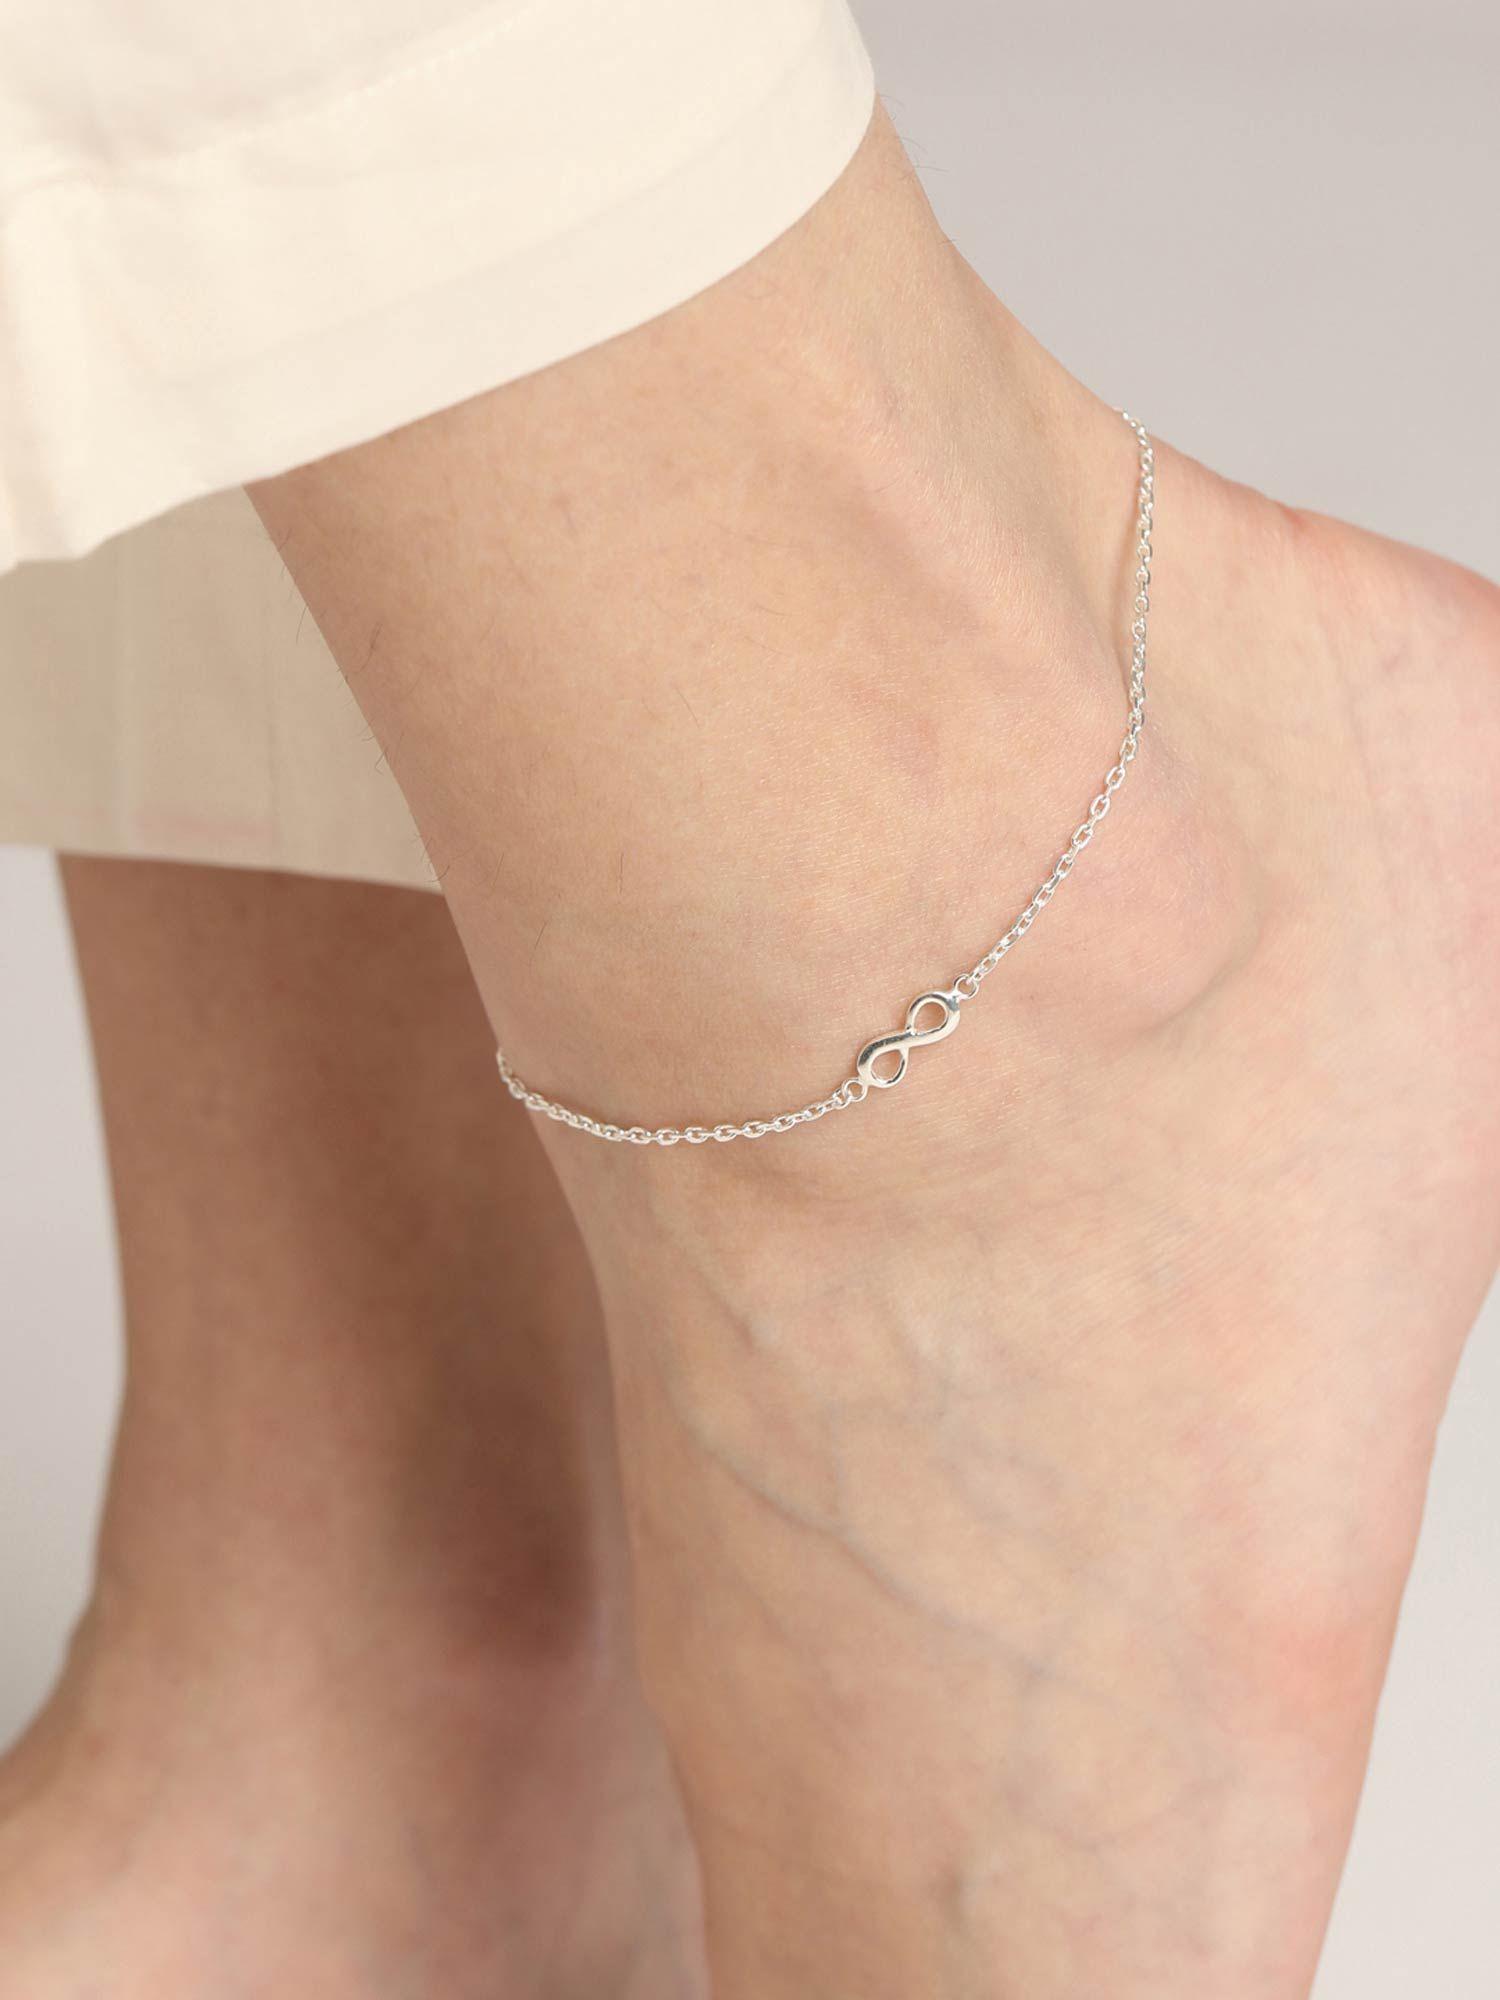 925-sterling-silver-infinity-adjustable-chain-anklet-payal-singlefor-women-and-girls